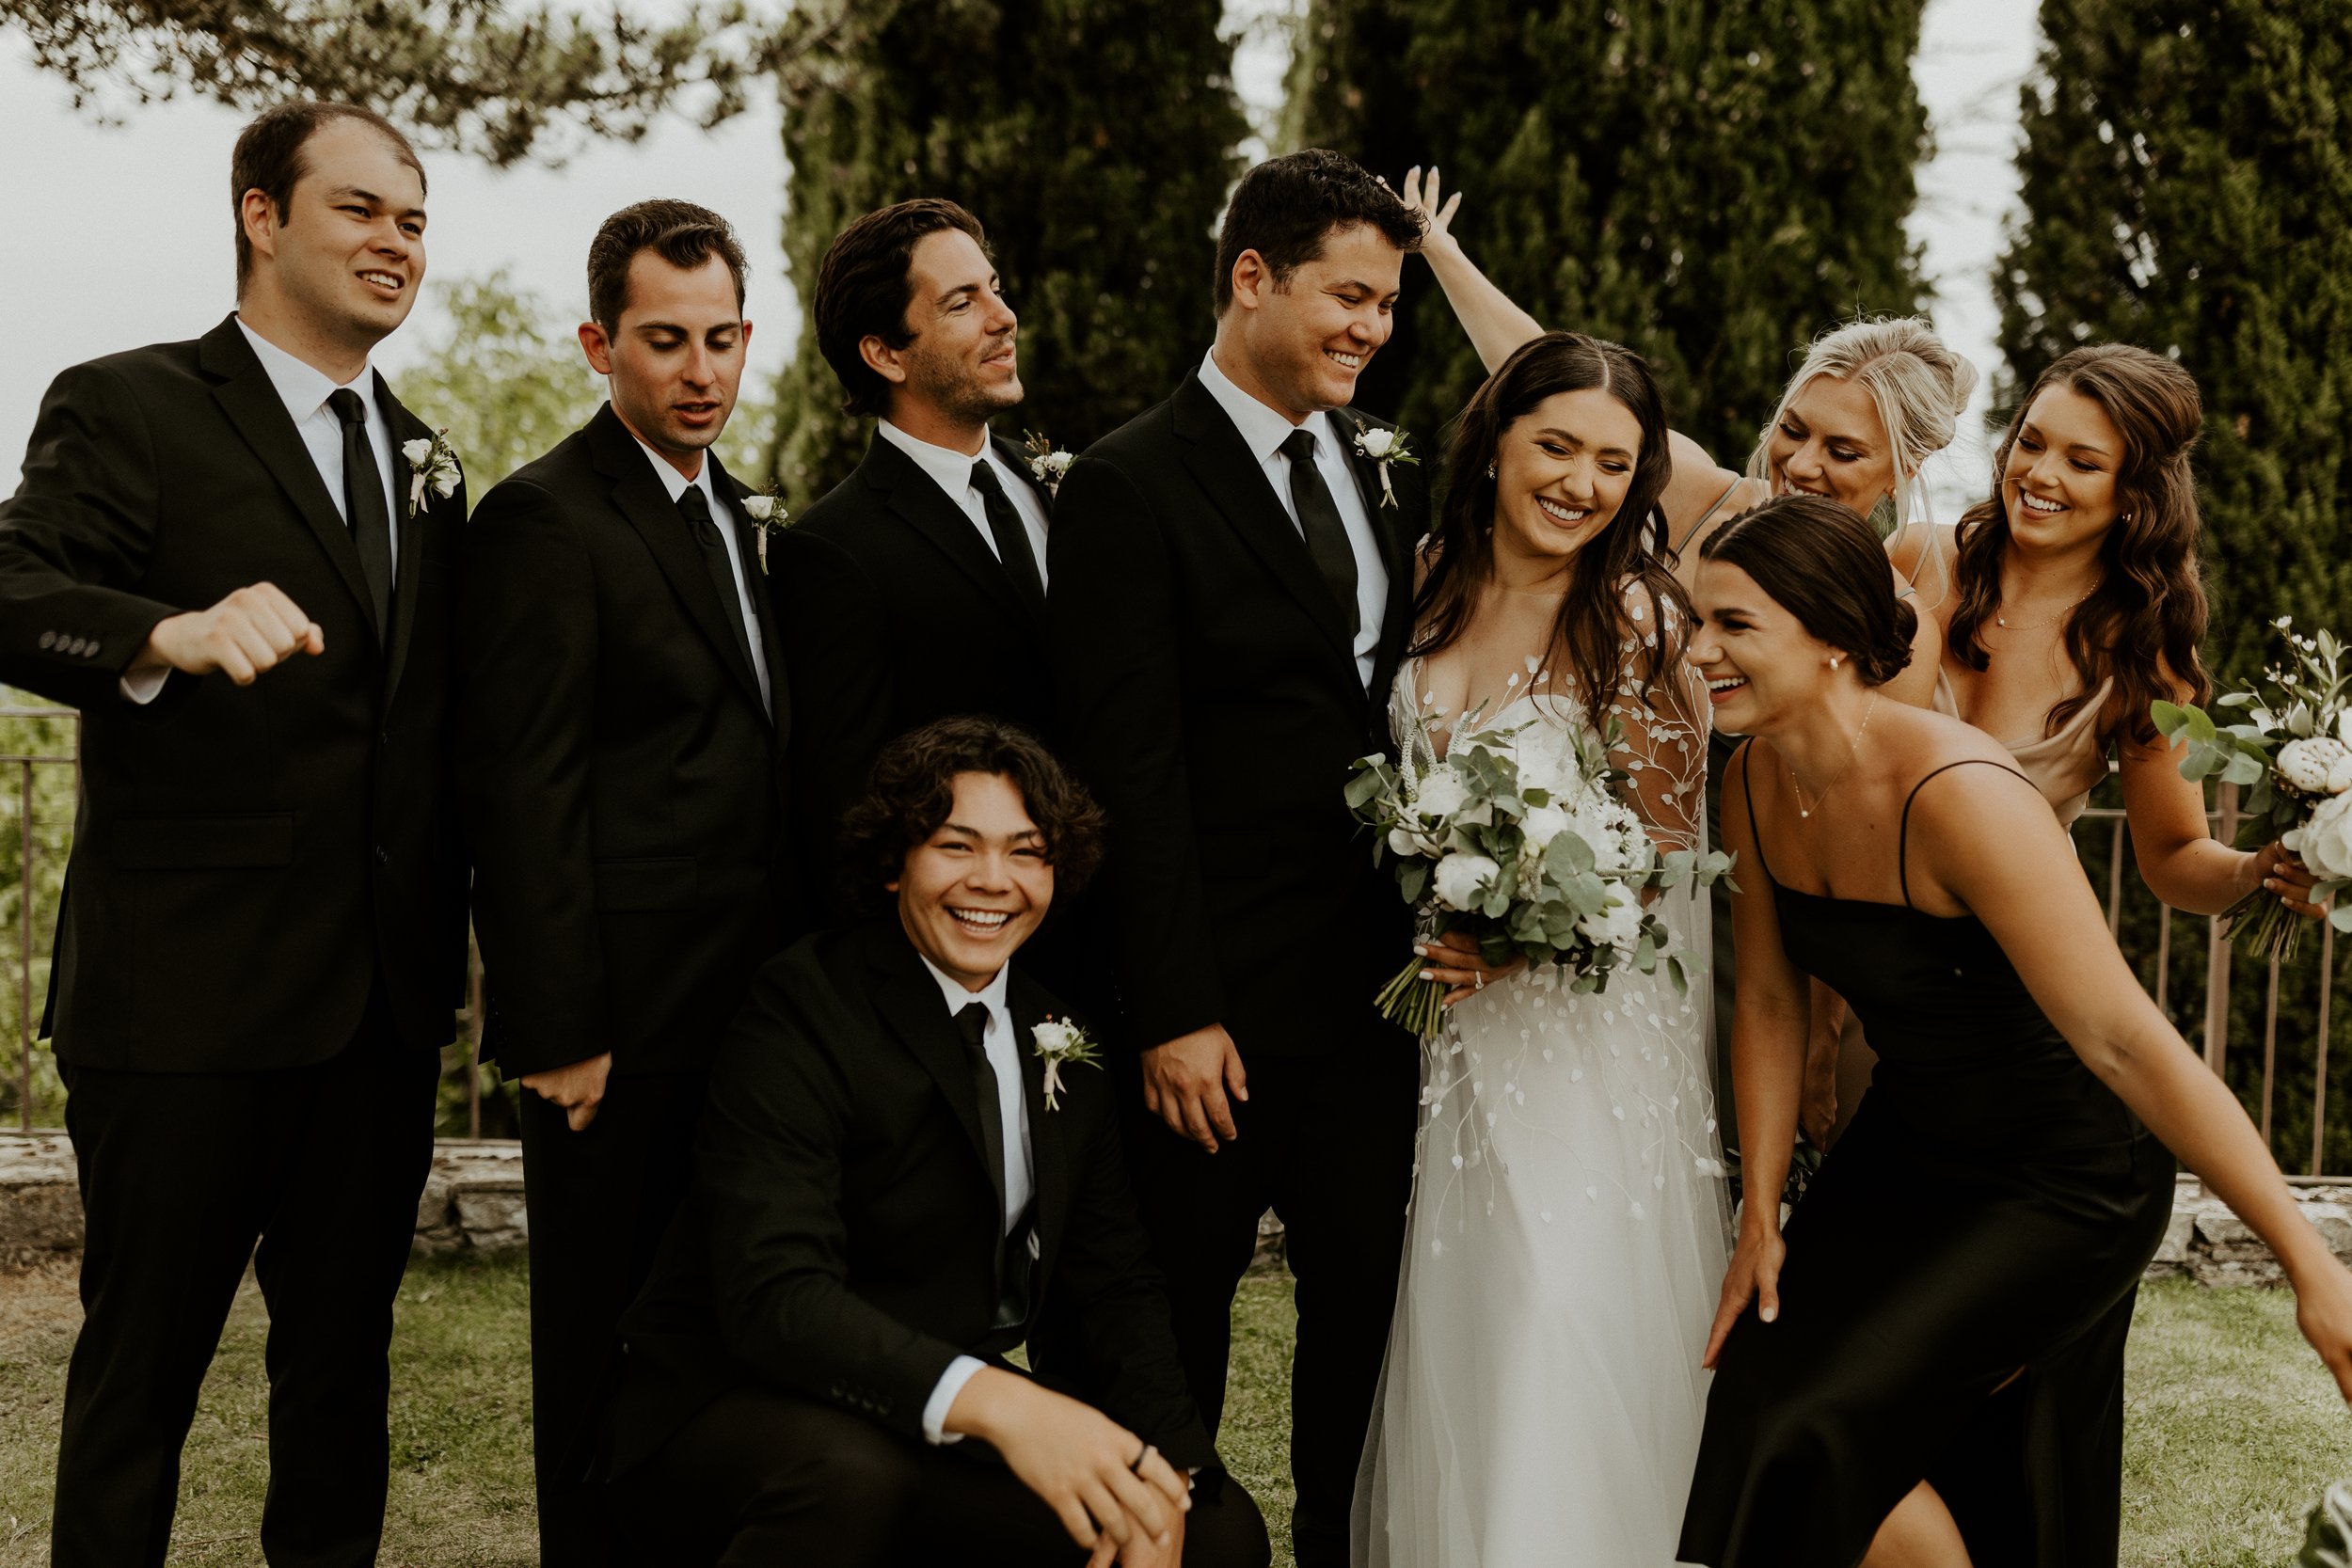 a chic and fun bridal party featuring classic black suits and silk bridesmaids dresses